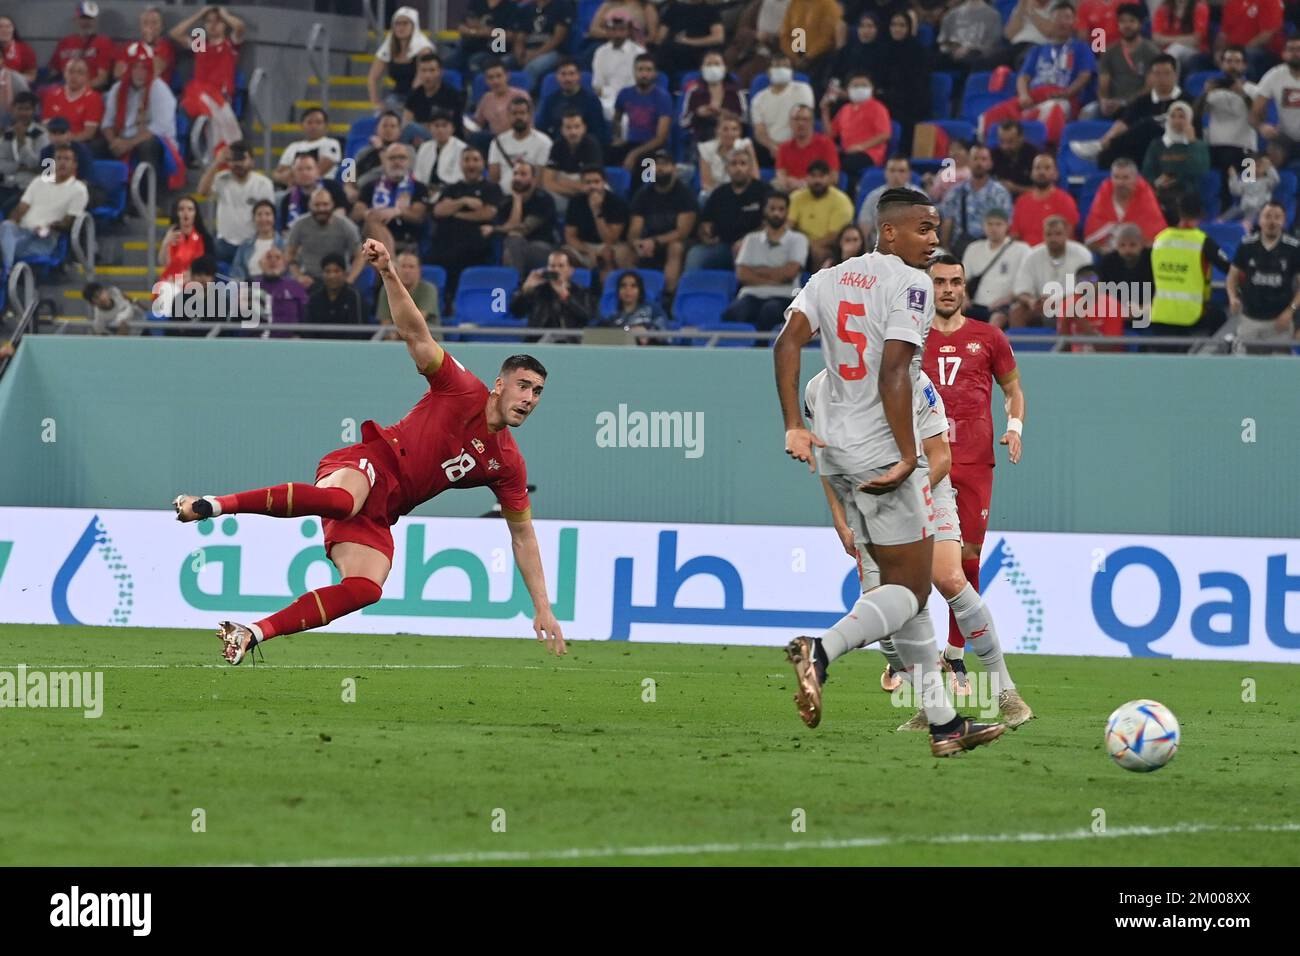 goal 2-1 VLAHOVIC Dusan (SRB) action, duels versus Manuel AKANJI (SUI), goal shot, Serbia (SRB) - Switzerland (SUI) 2-3 group stage group G, game 47 on December 2nd, 2022, Stadium 974, Football World Cup 2022 in Qatar from 20.11. - 18.12.2022 ? Stock Photo